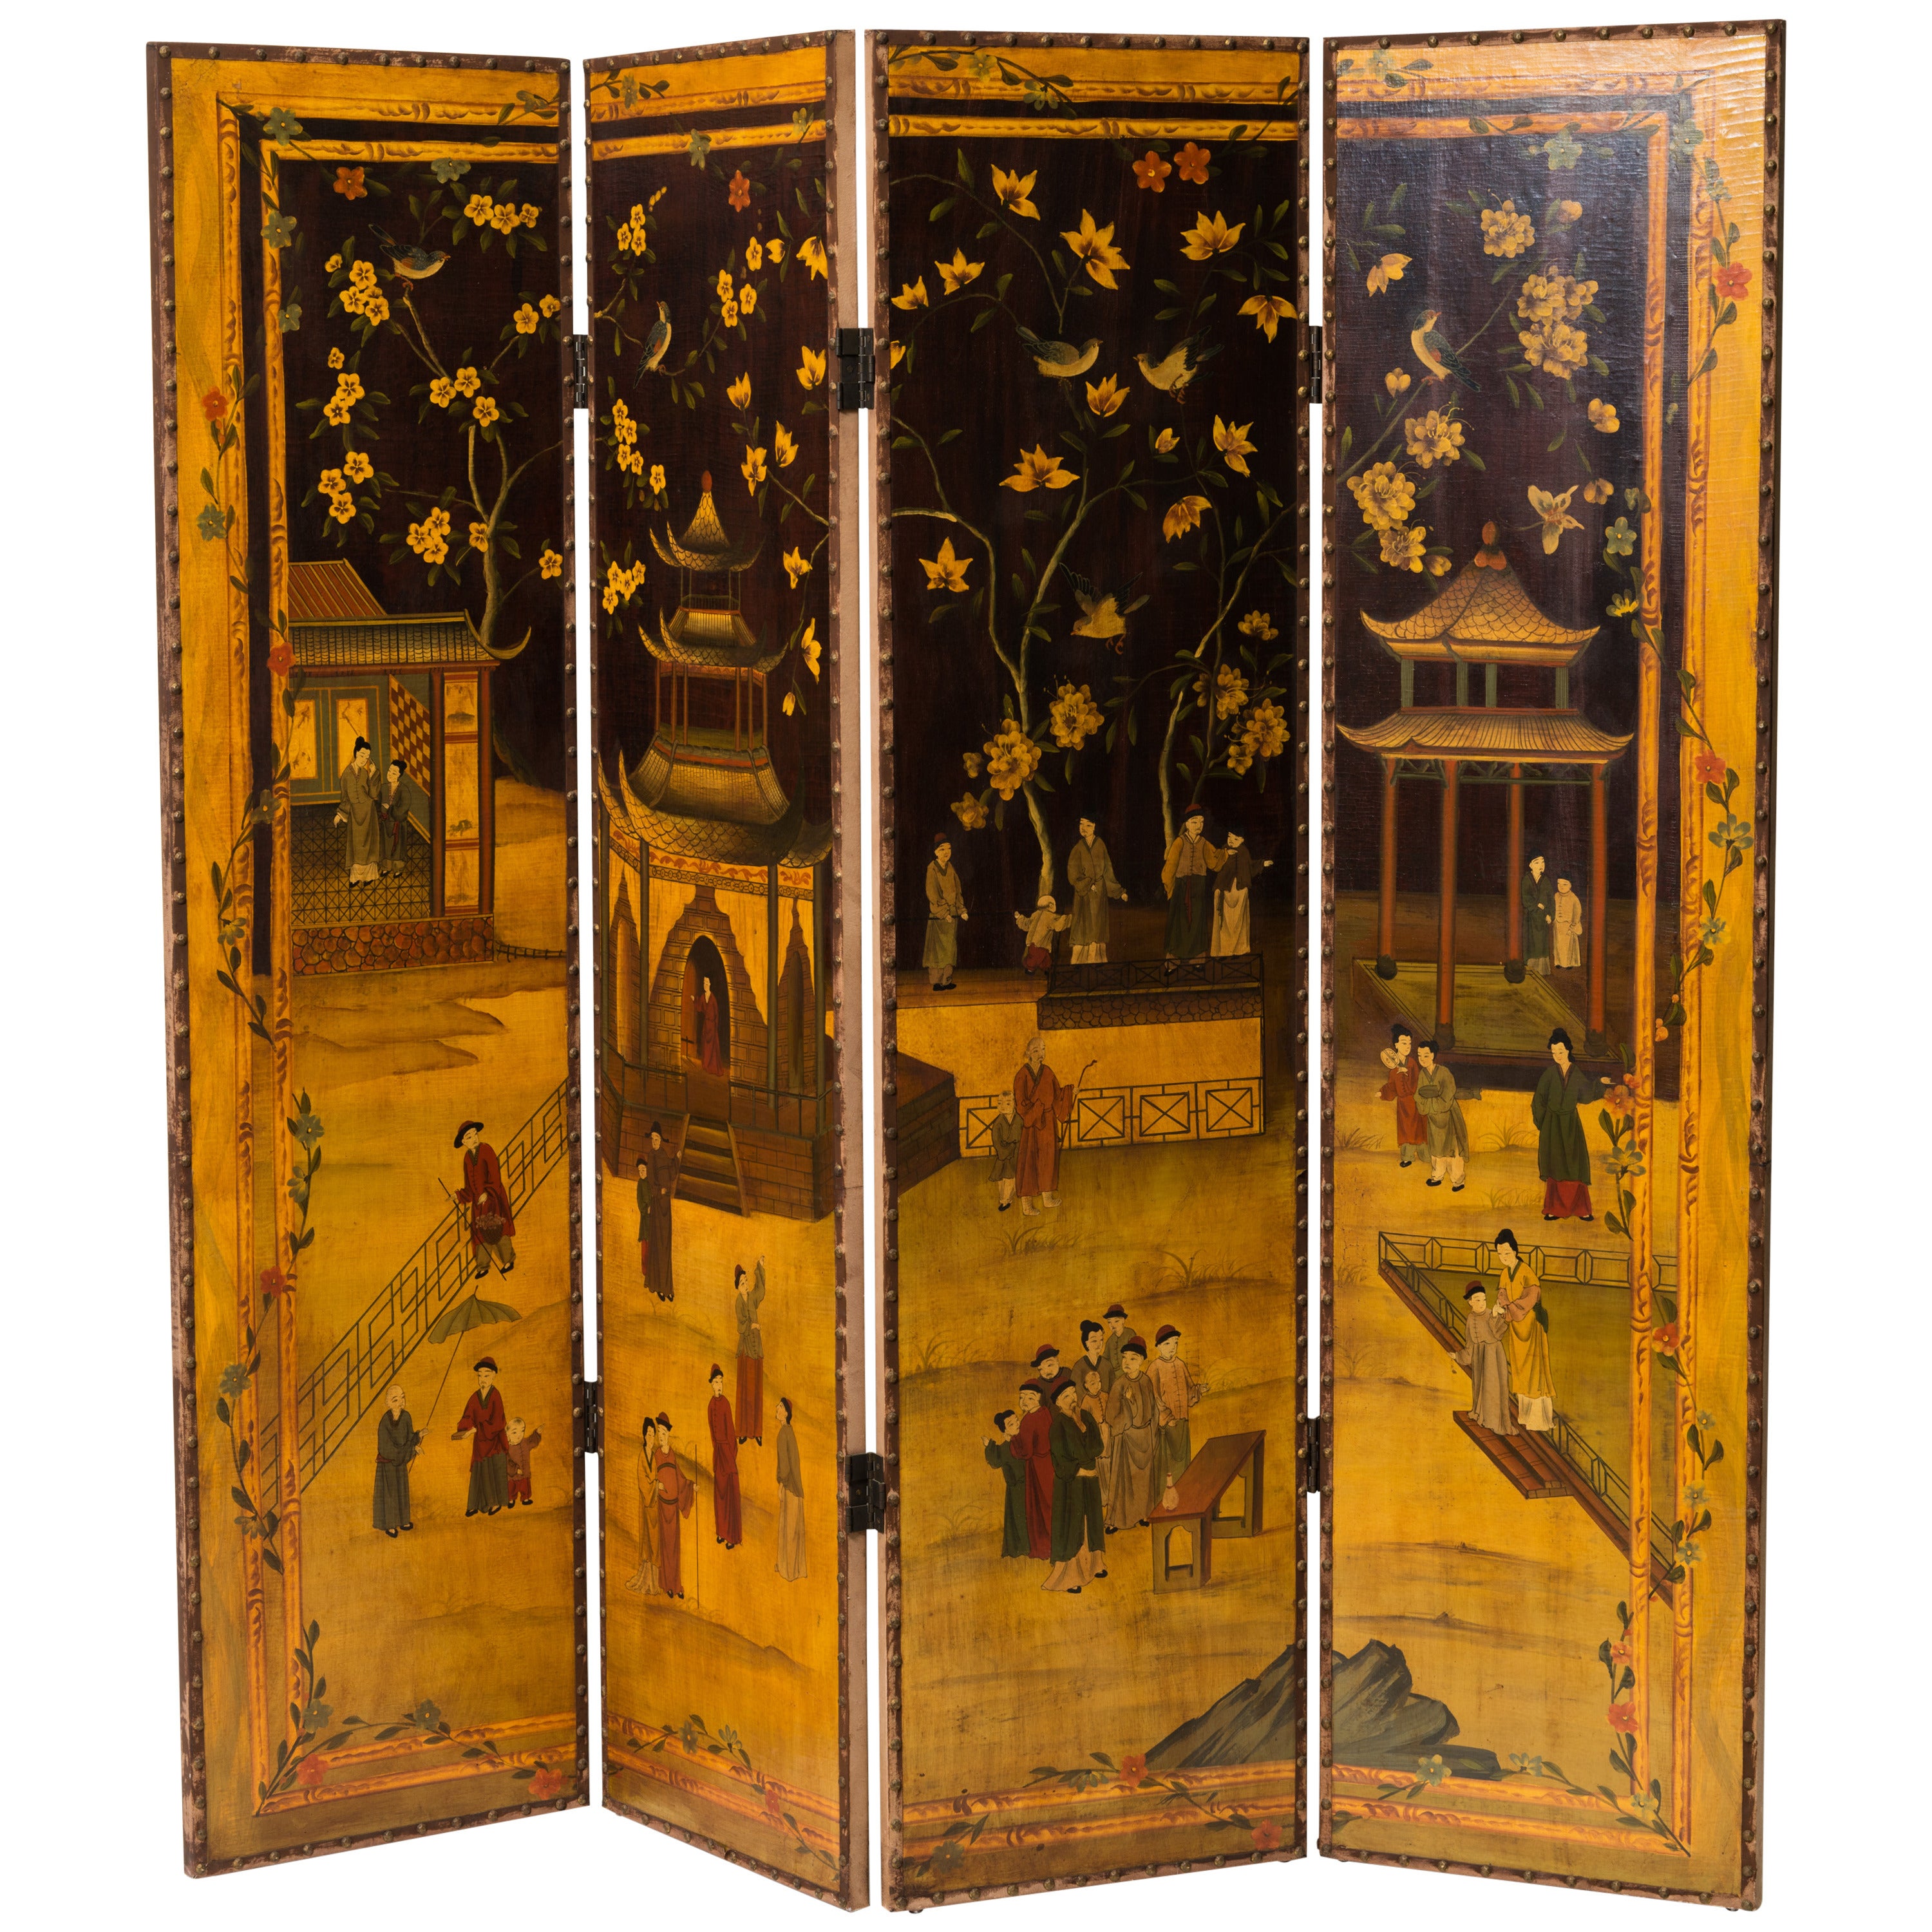 Hand-Painted Asian Motif Room Divider